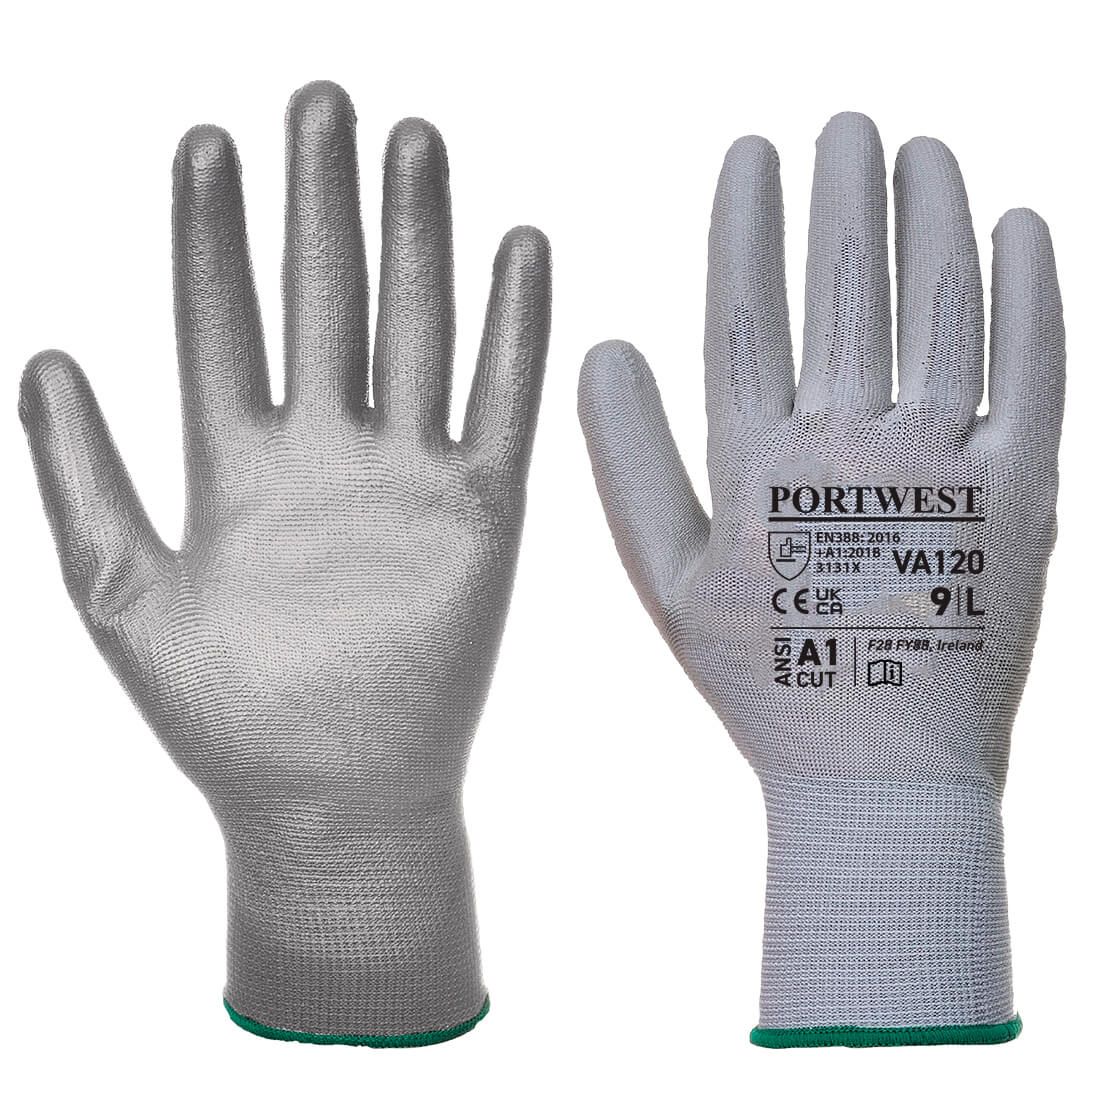 Ice Gripter - High-Visibility Etched Latex Rubber-Dipped Palm Glove Size  9(L) 12 Pair, #300INT-9(L)